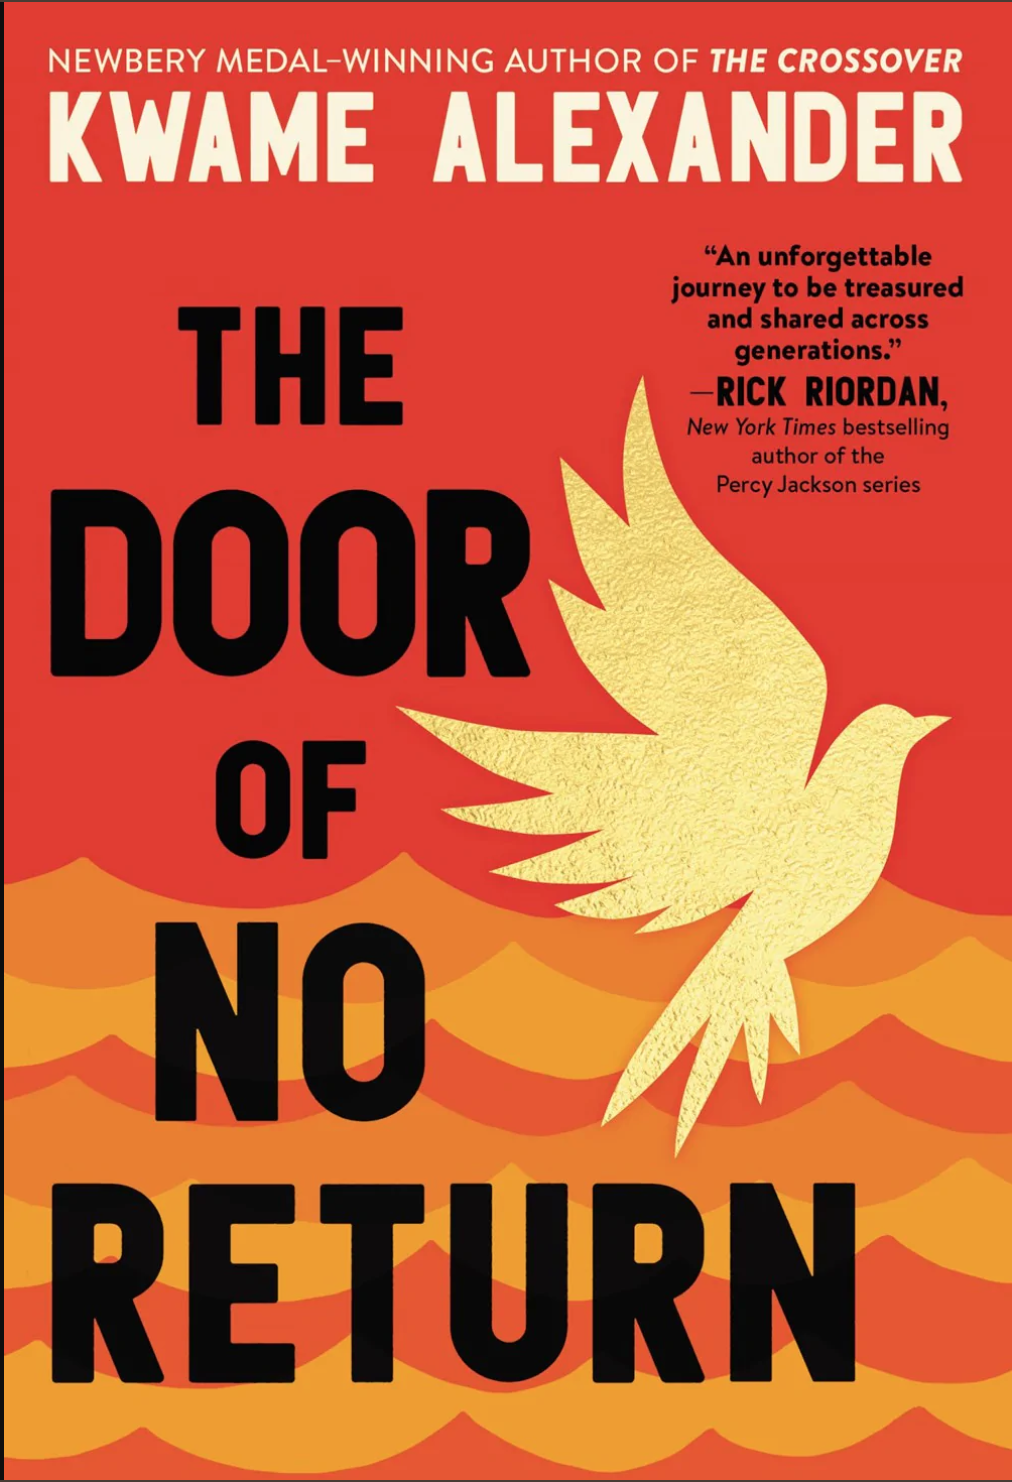 In the lower half of the book, against a bright orange background, are lighter orange ocean waves. In front of the waves is a light yellow bird silhouette and to the left of it, written in black block letters, spells the title: The Door of No Return. 